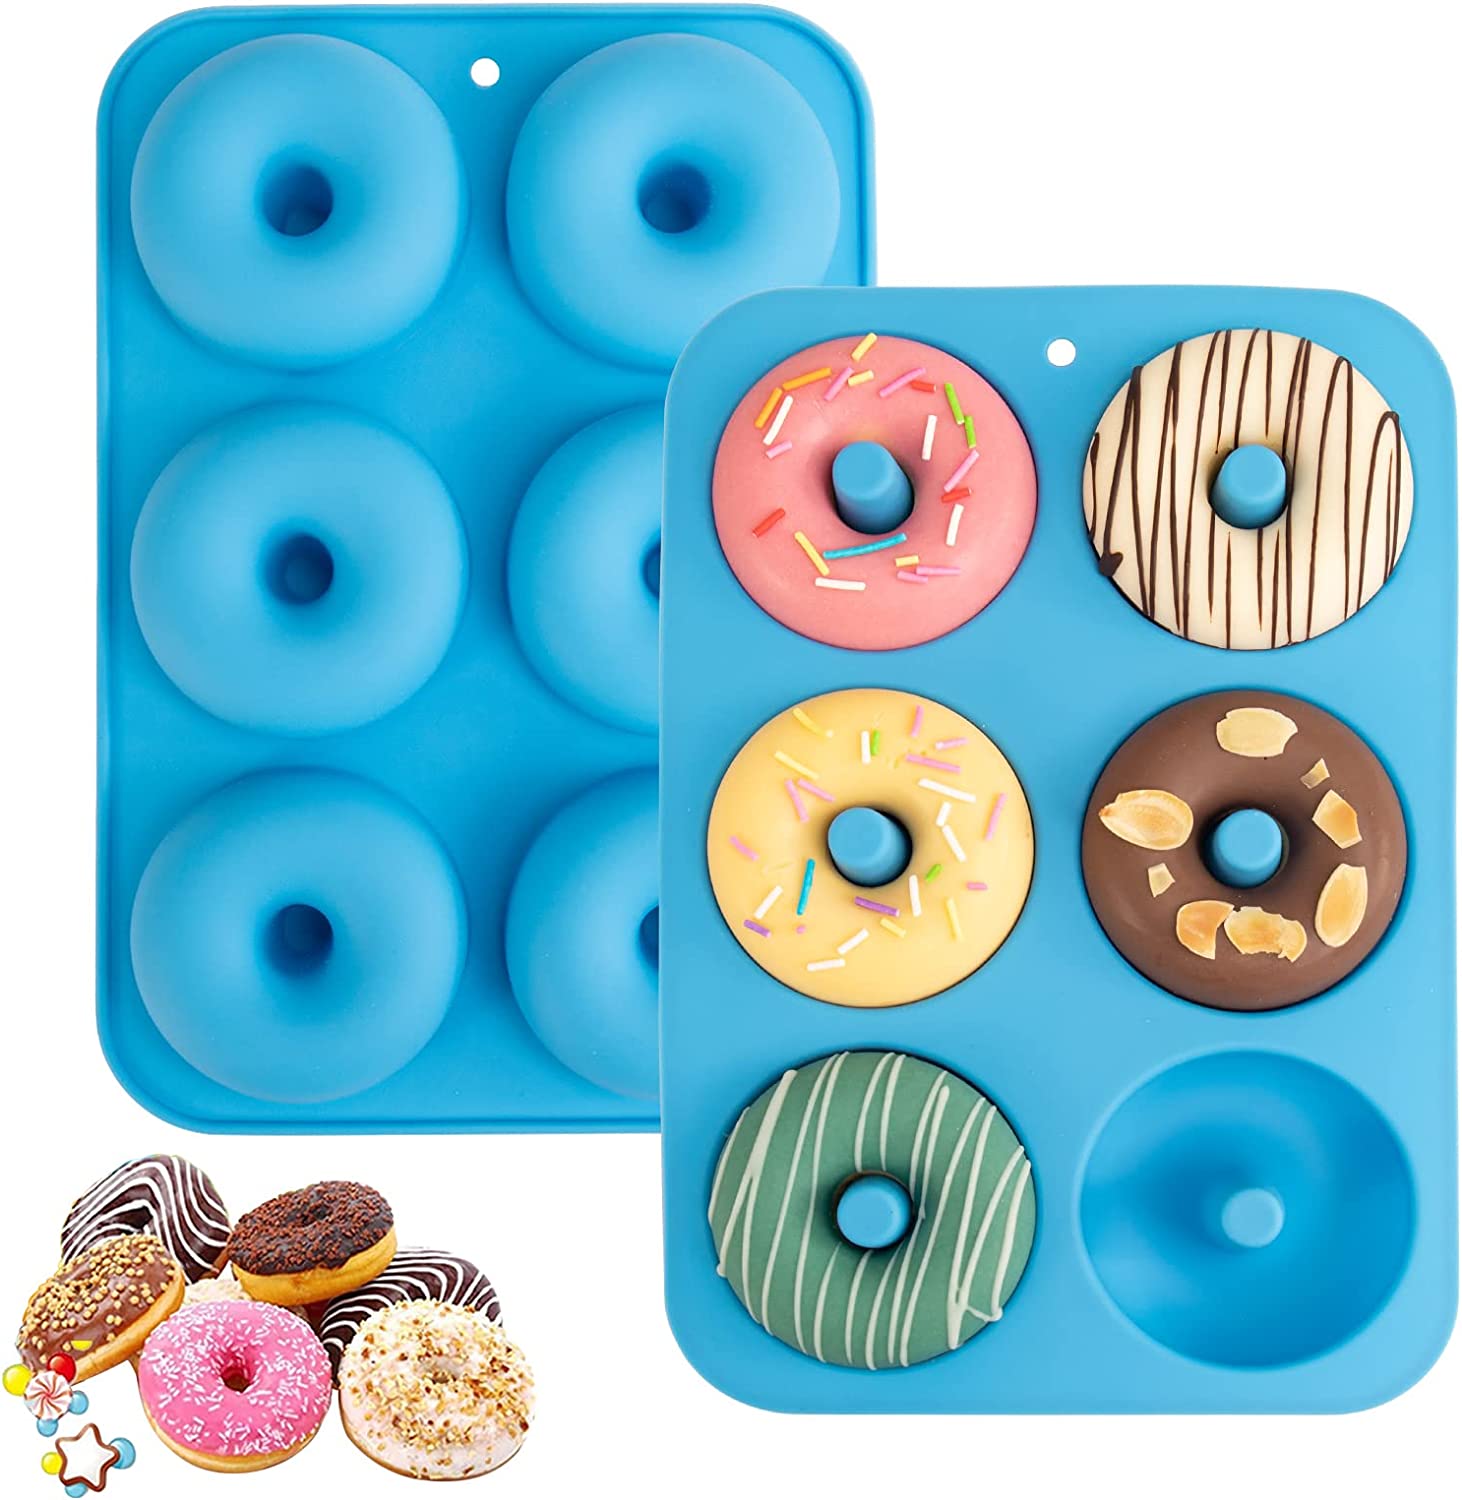 Aichoof Silicone Donut Mold for 6 Doughnuts, Set of 2. [...]